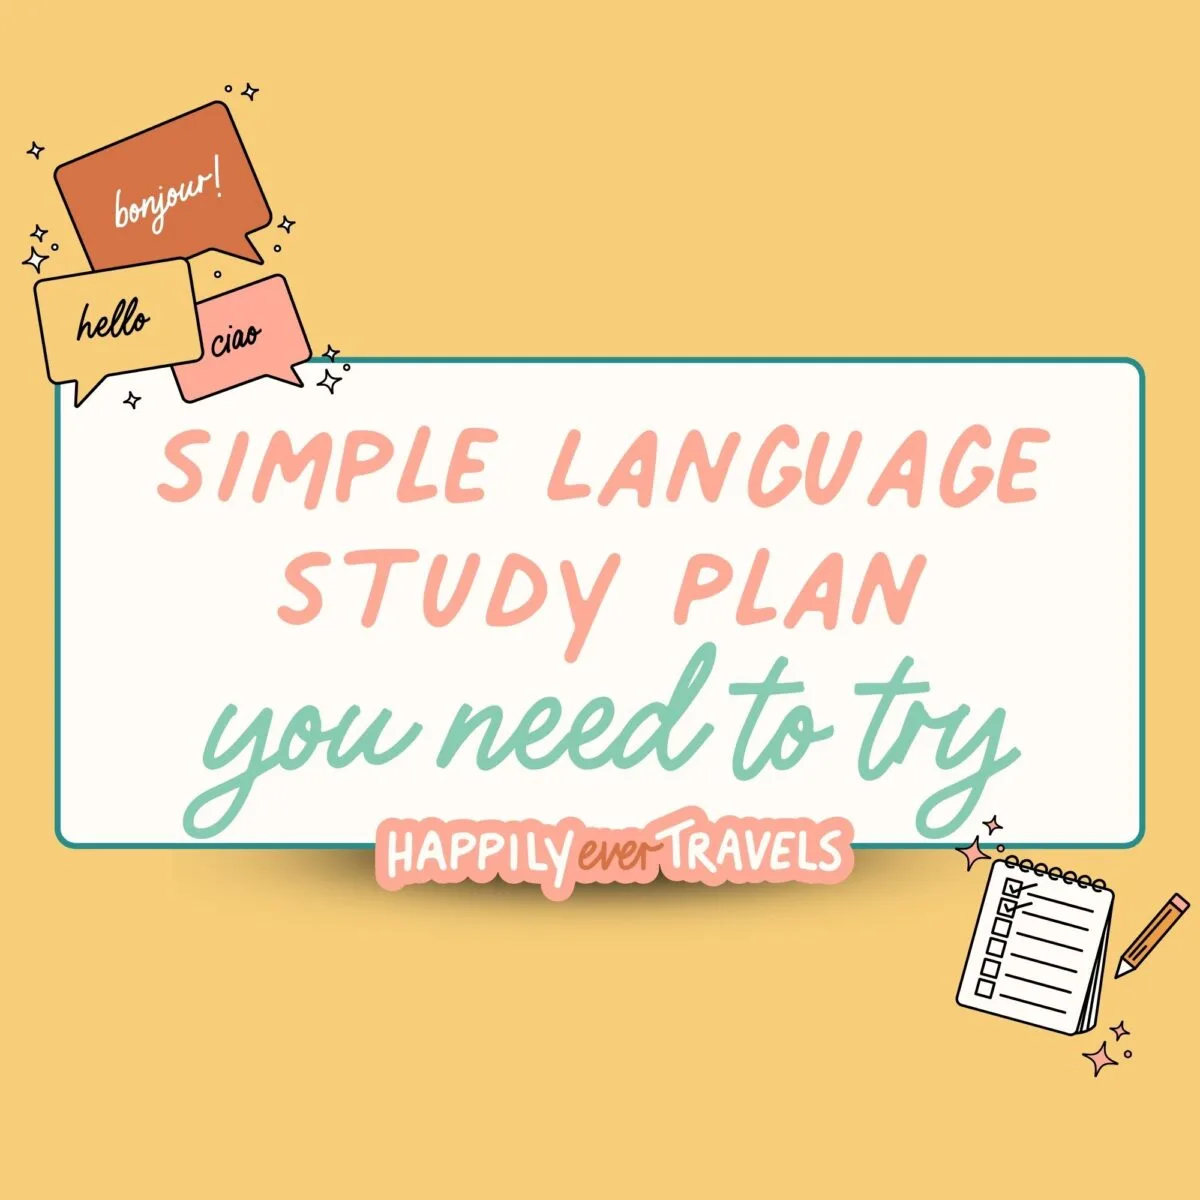 The Super Simple Language Study Plan You Need to Try